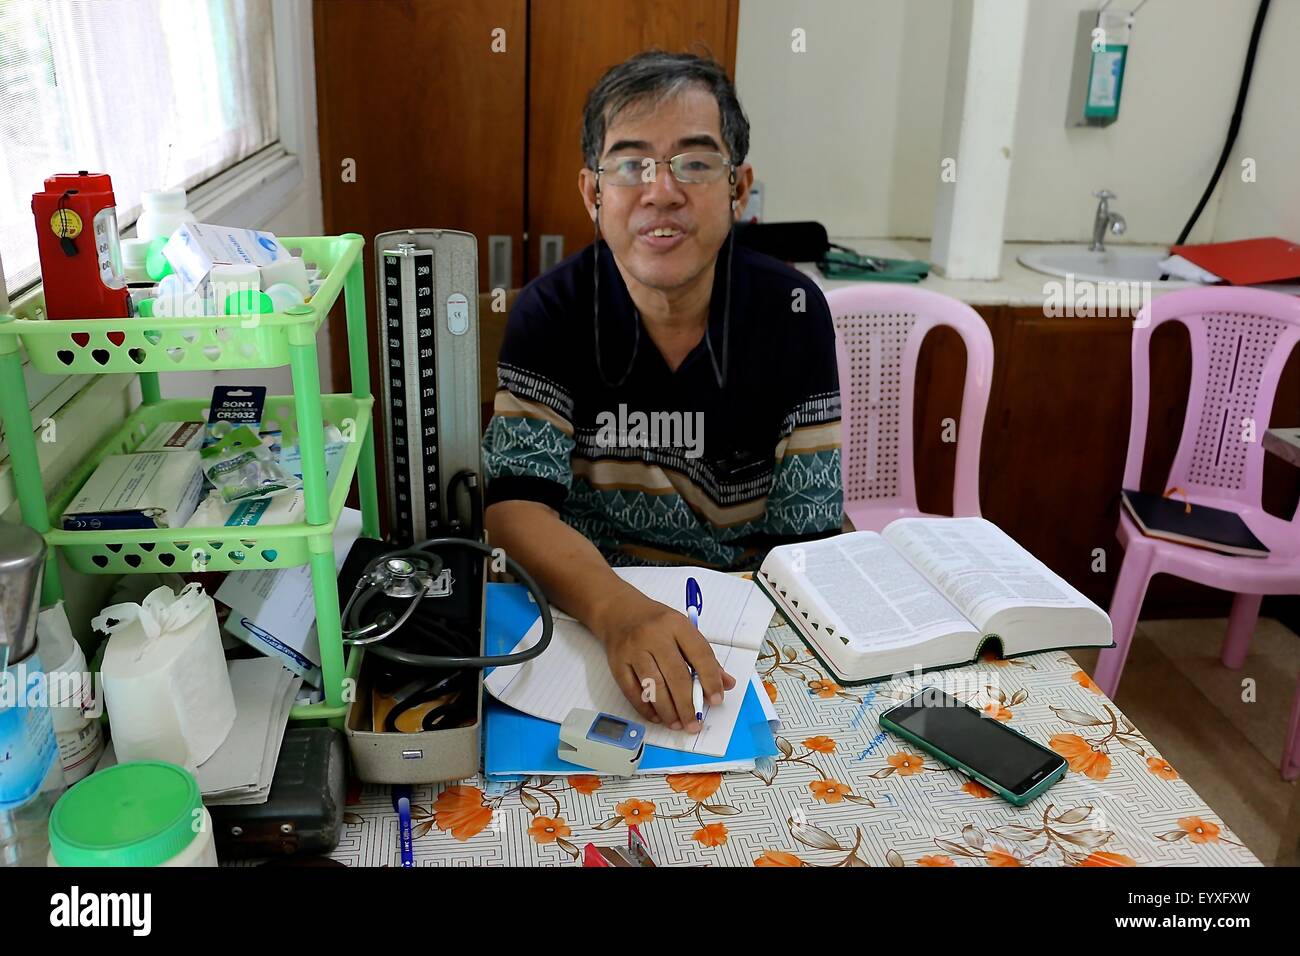 Doctor Chit Pe photographed during a quiet moment aboard the doctor's ship in the Irrawaddy-Delta in Myanmar, 17 June 2015. There is much need for medical facilities in Myanmar following flooding. After cyclone Nargis, German money has funded a doctor's ship there. PHOTO: VERENA HOELZL/DPA Stock Photo